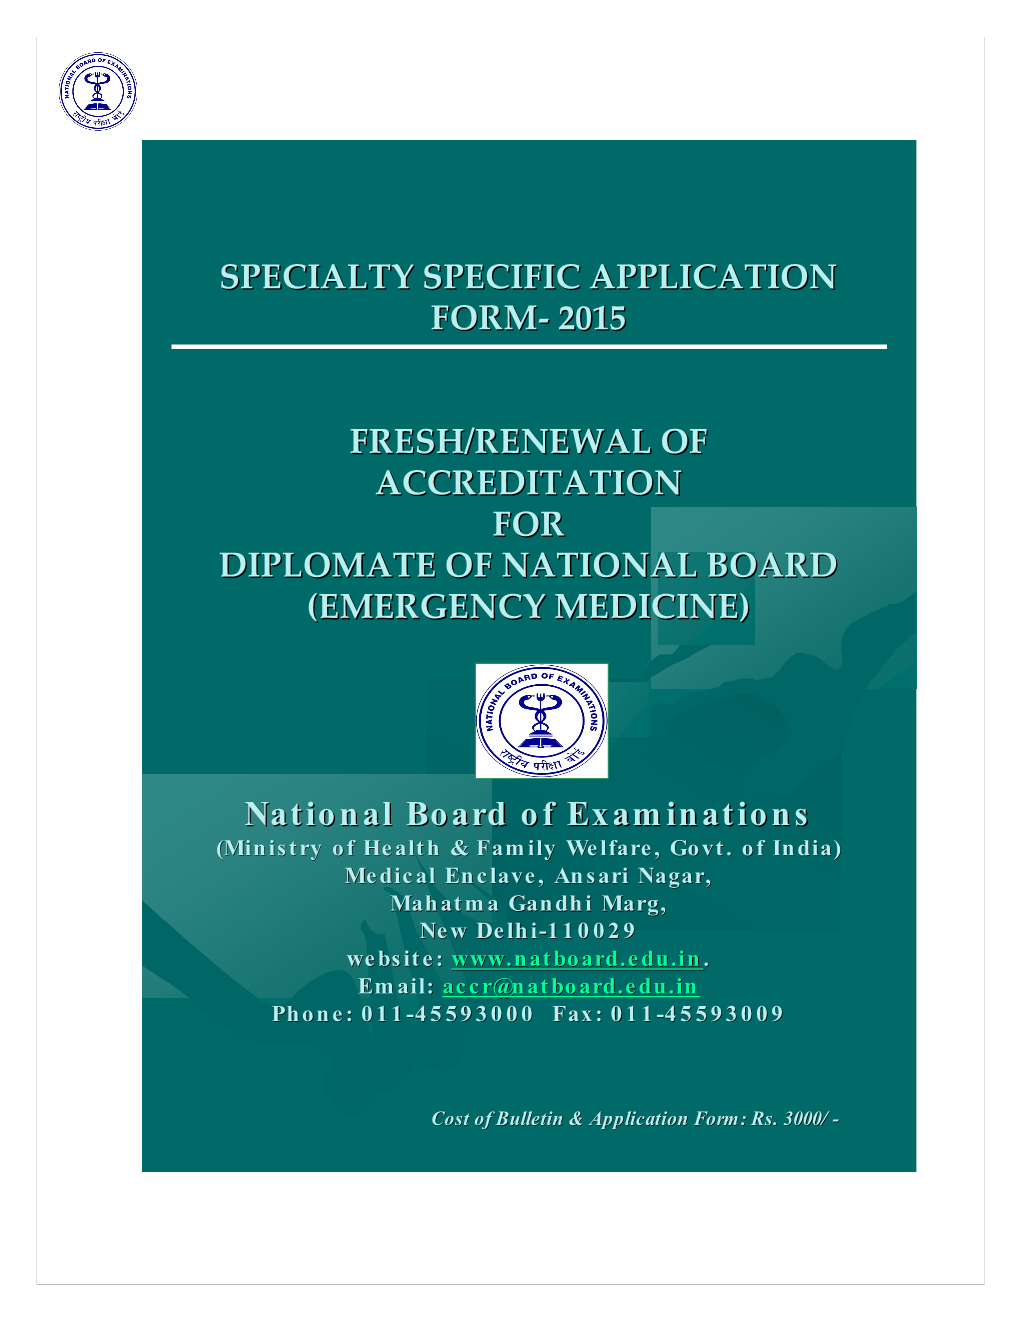 Specialty Specific Application Form 2015